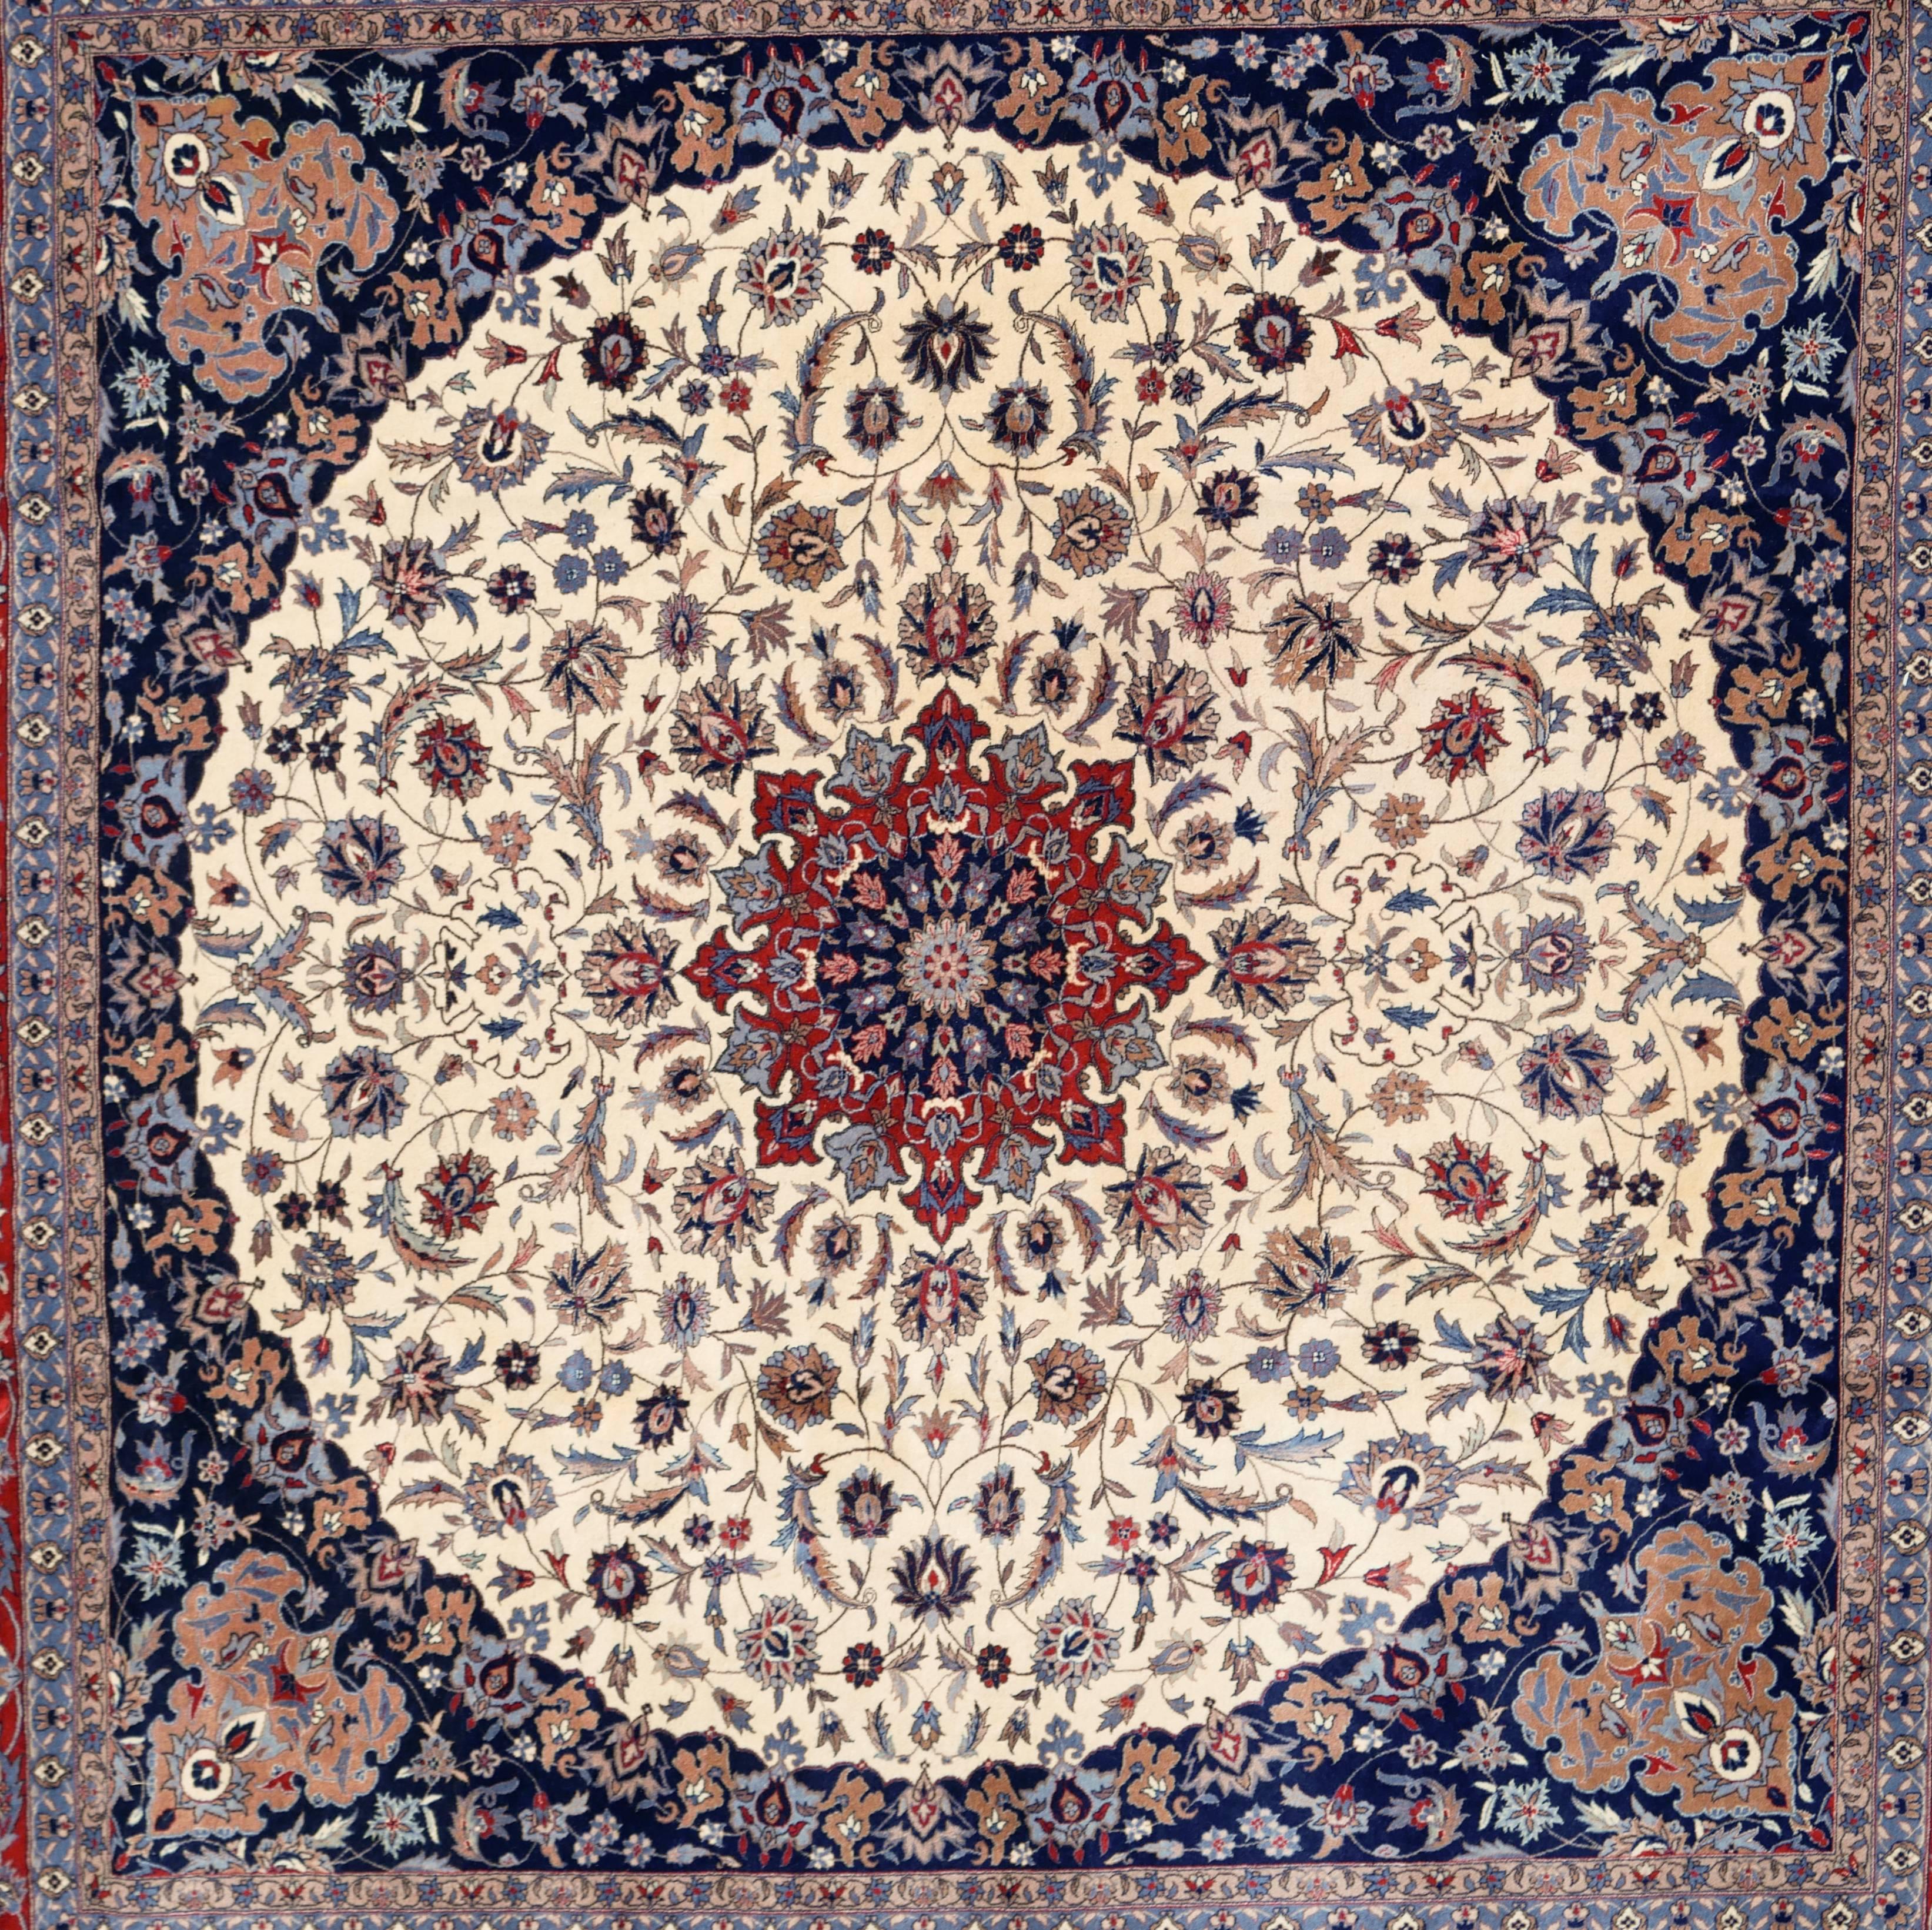 This is a stunningly beautiful square Sino-Persian Isfahan carpet in very fine knot (1 000 000 per square meter) 
Notes on Chinese rugs:
The widely unpopular 'Made in China' stigma attached to most products manufactured in China following the